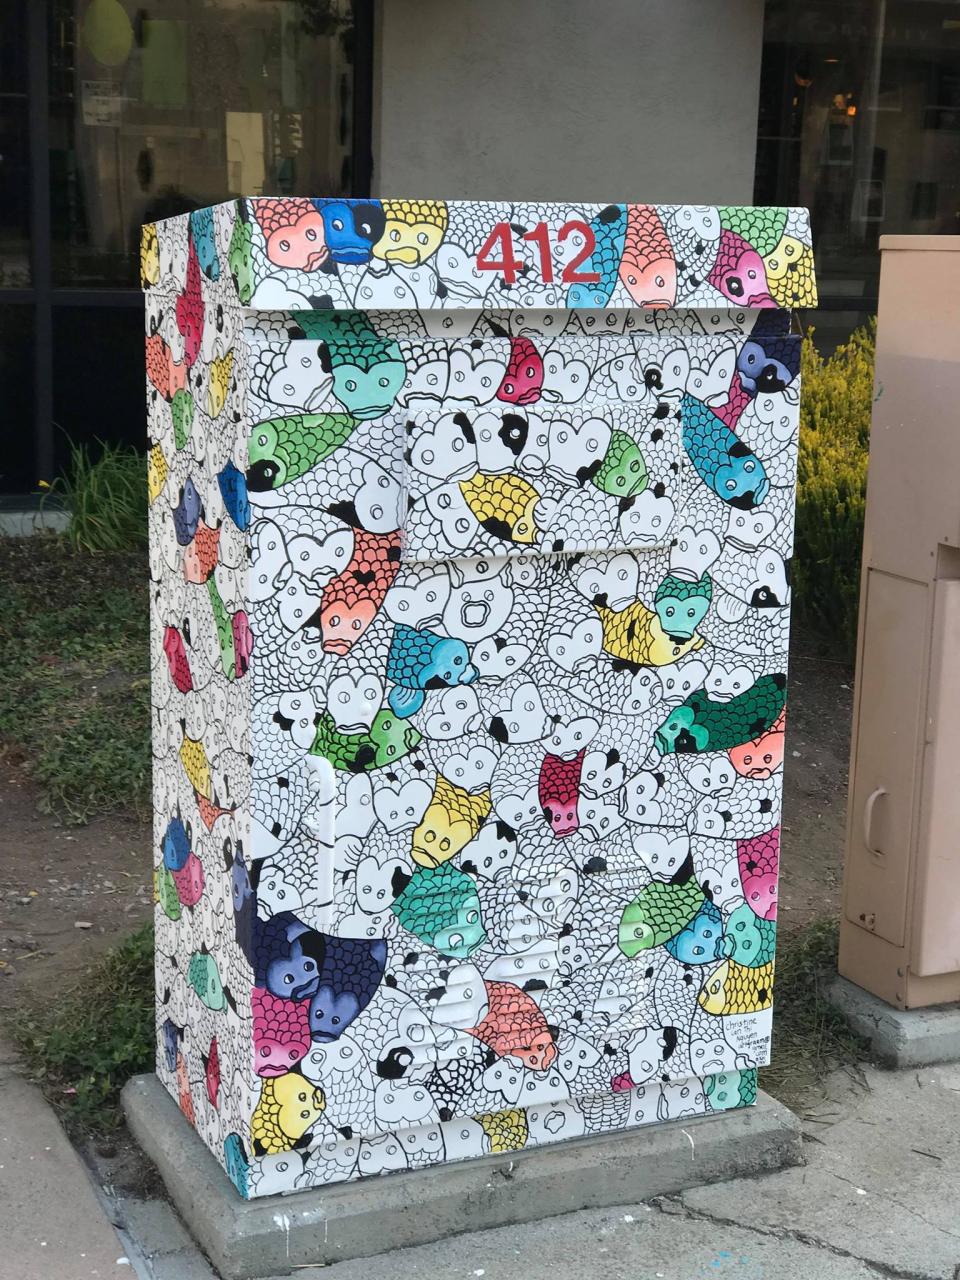 Painted utility box